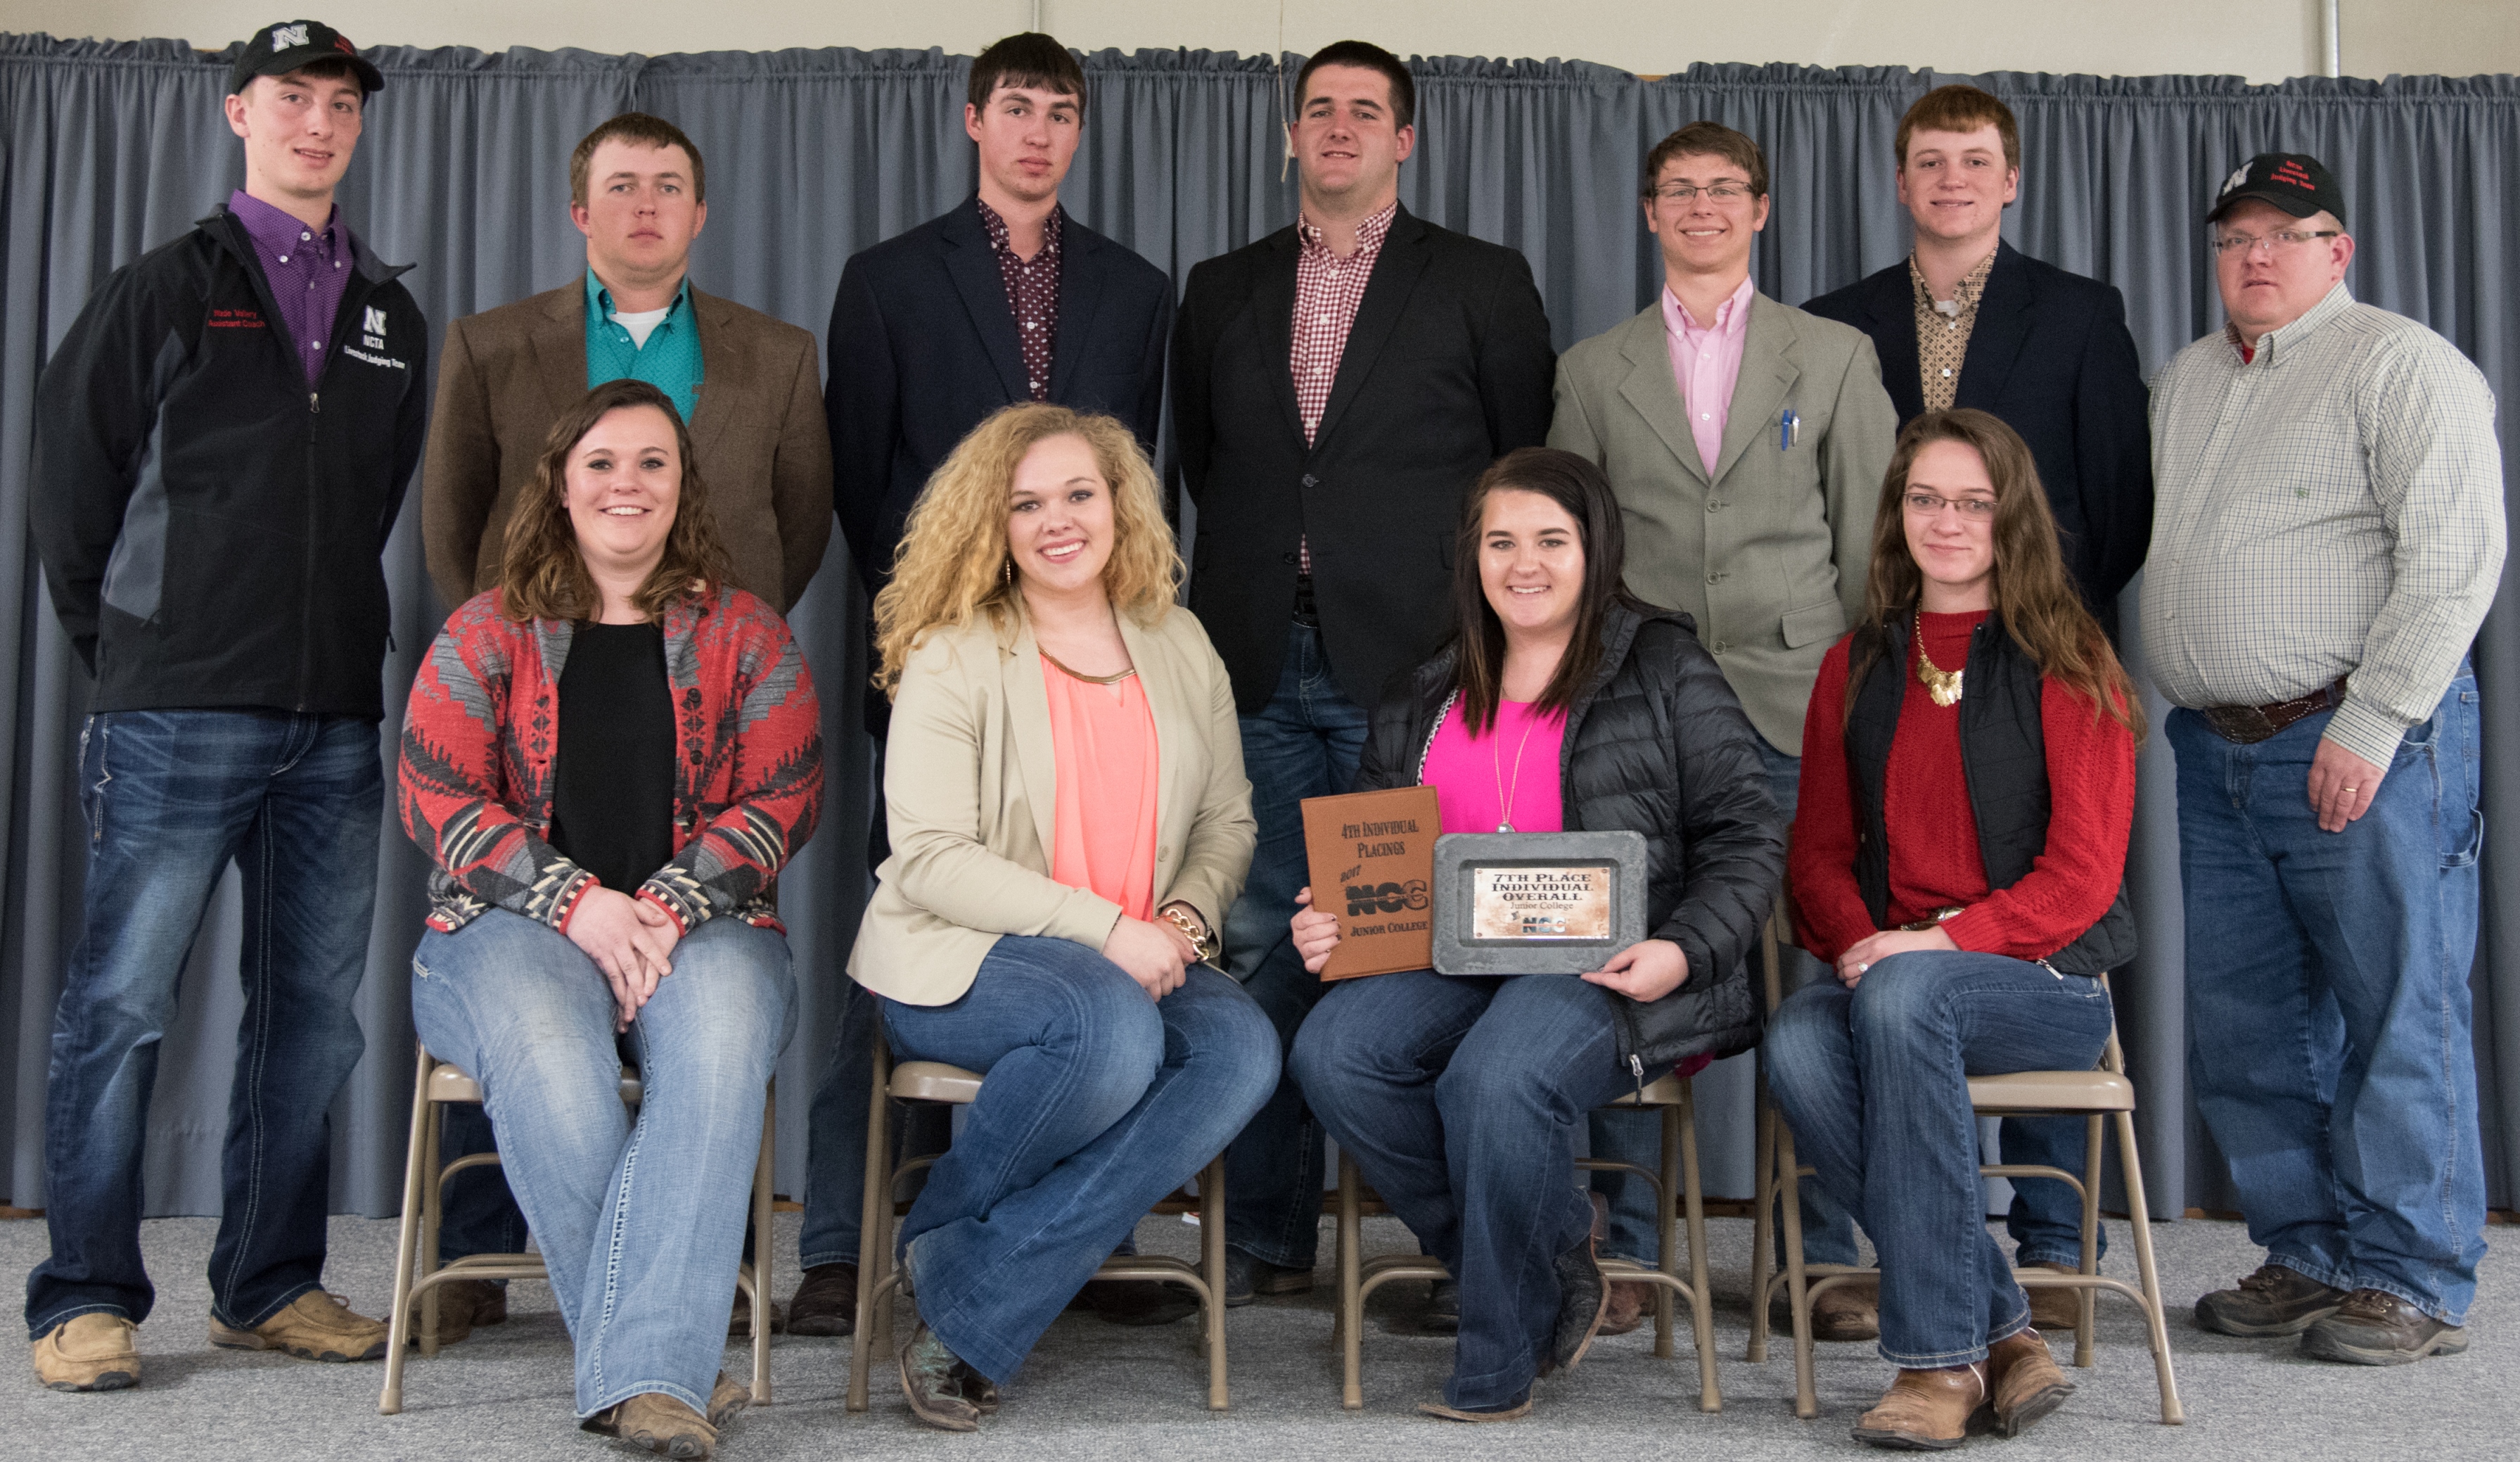 The NCTA Livestock Judging Team competed at the 2017 Nebraska Cattleman’s Classic in Kearney. (Photo by Legacy Livestock Imaging)